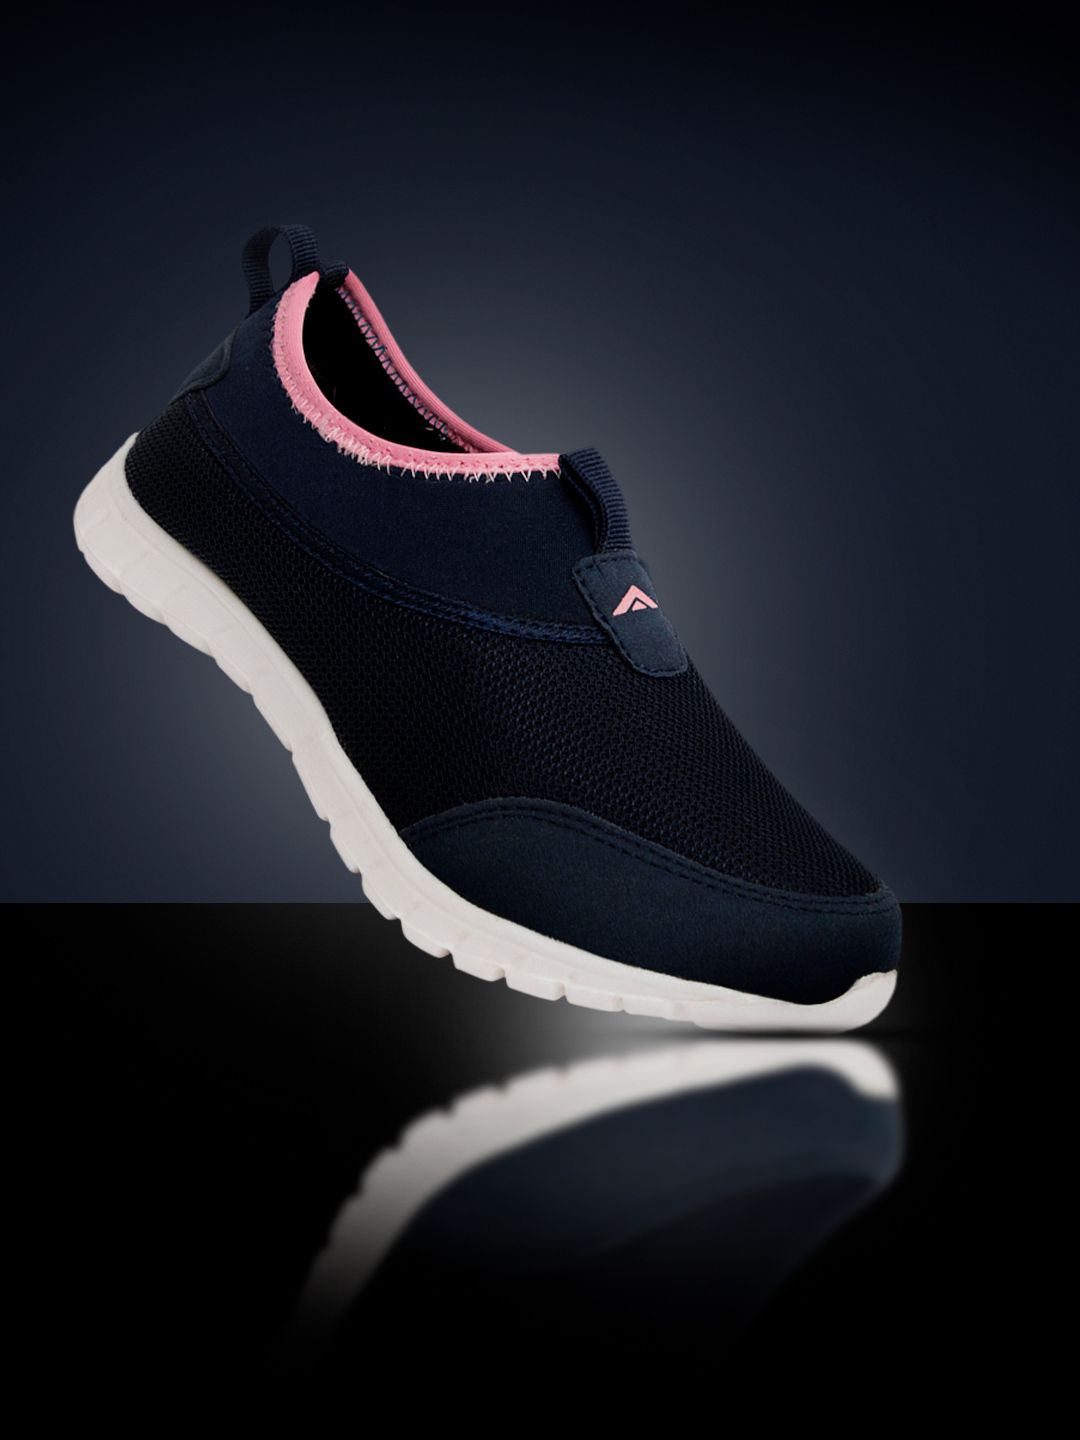 ASIAN Women Navy Blue Running Shoes Price in India